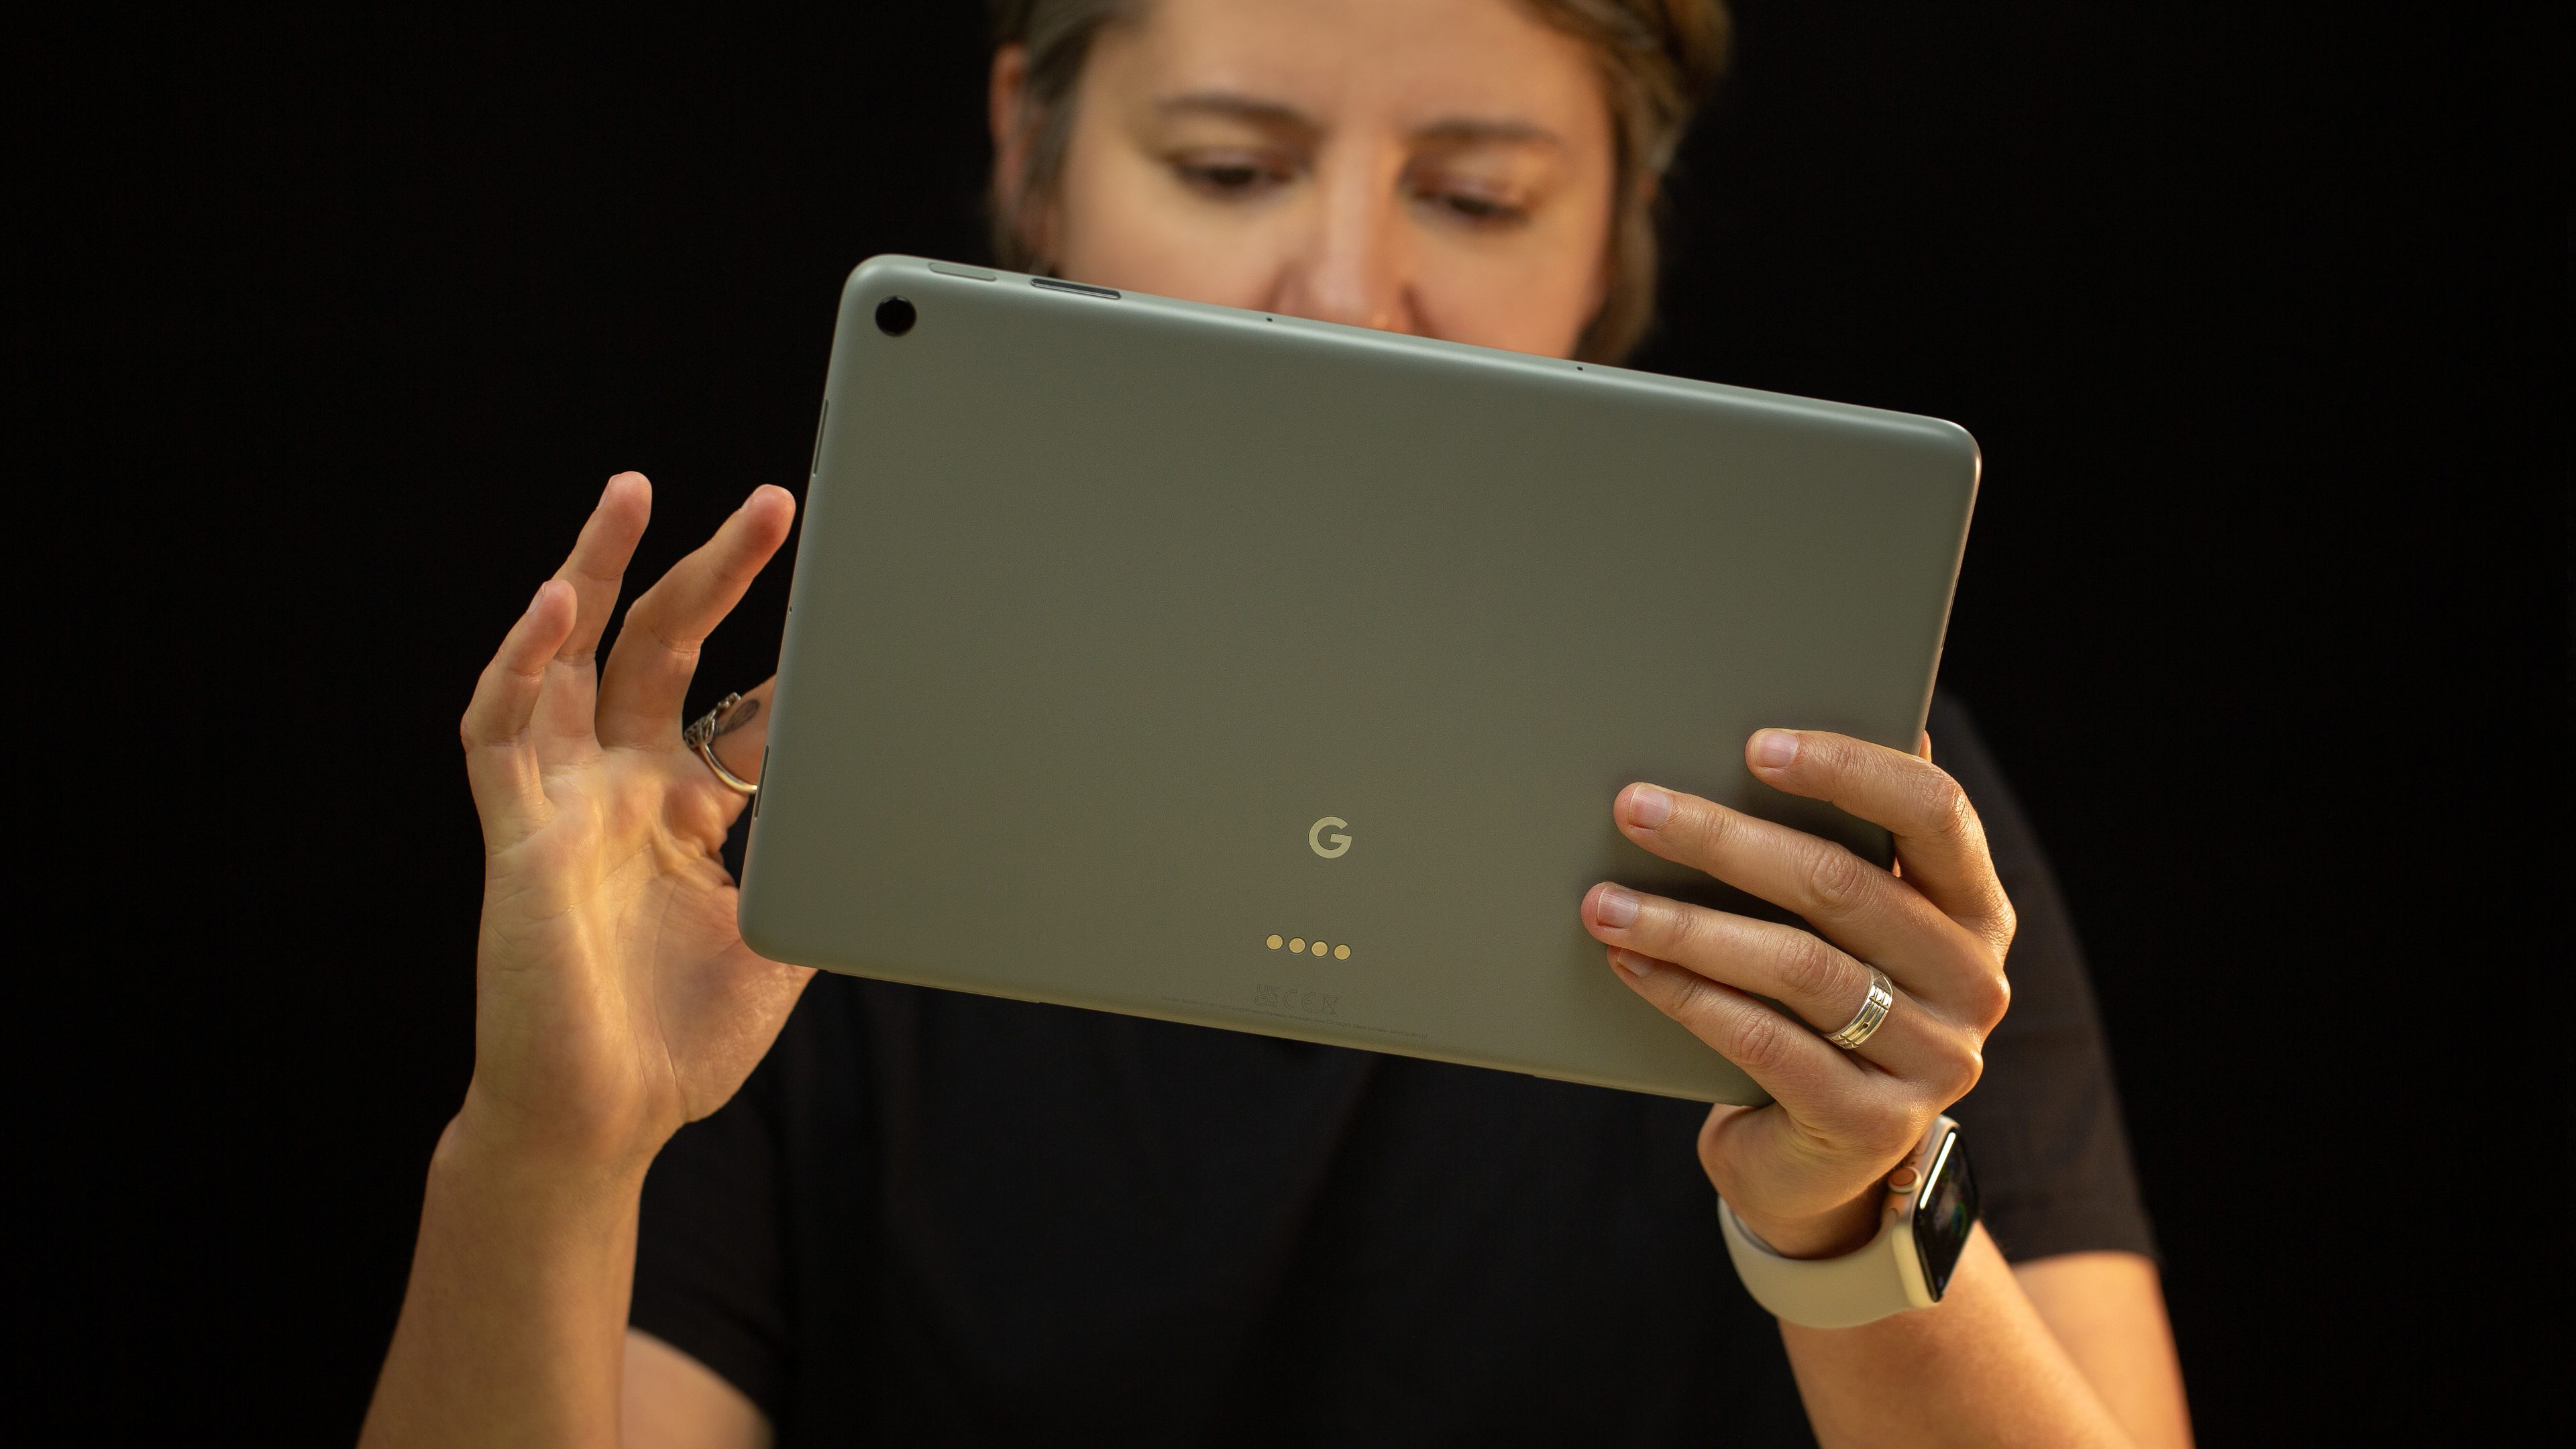 Google Pixel Tablet review: The dock changes the game